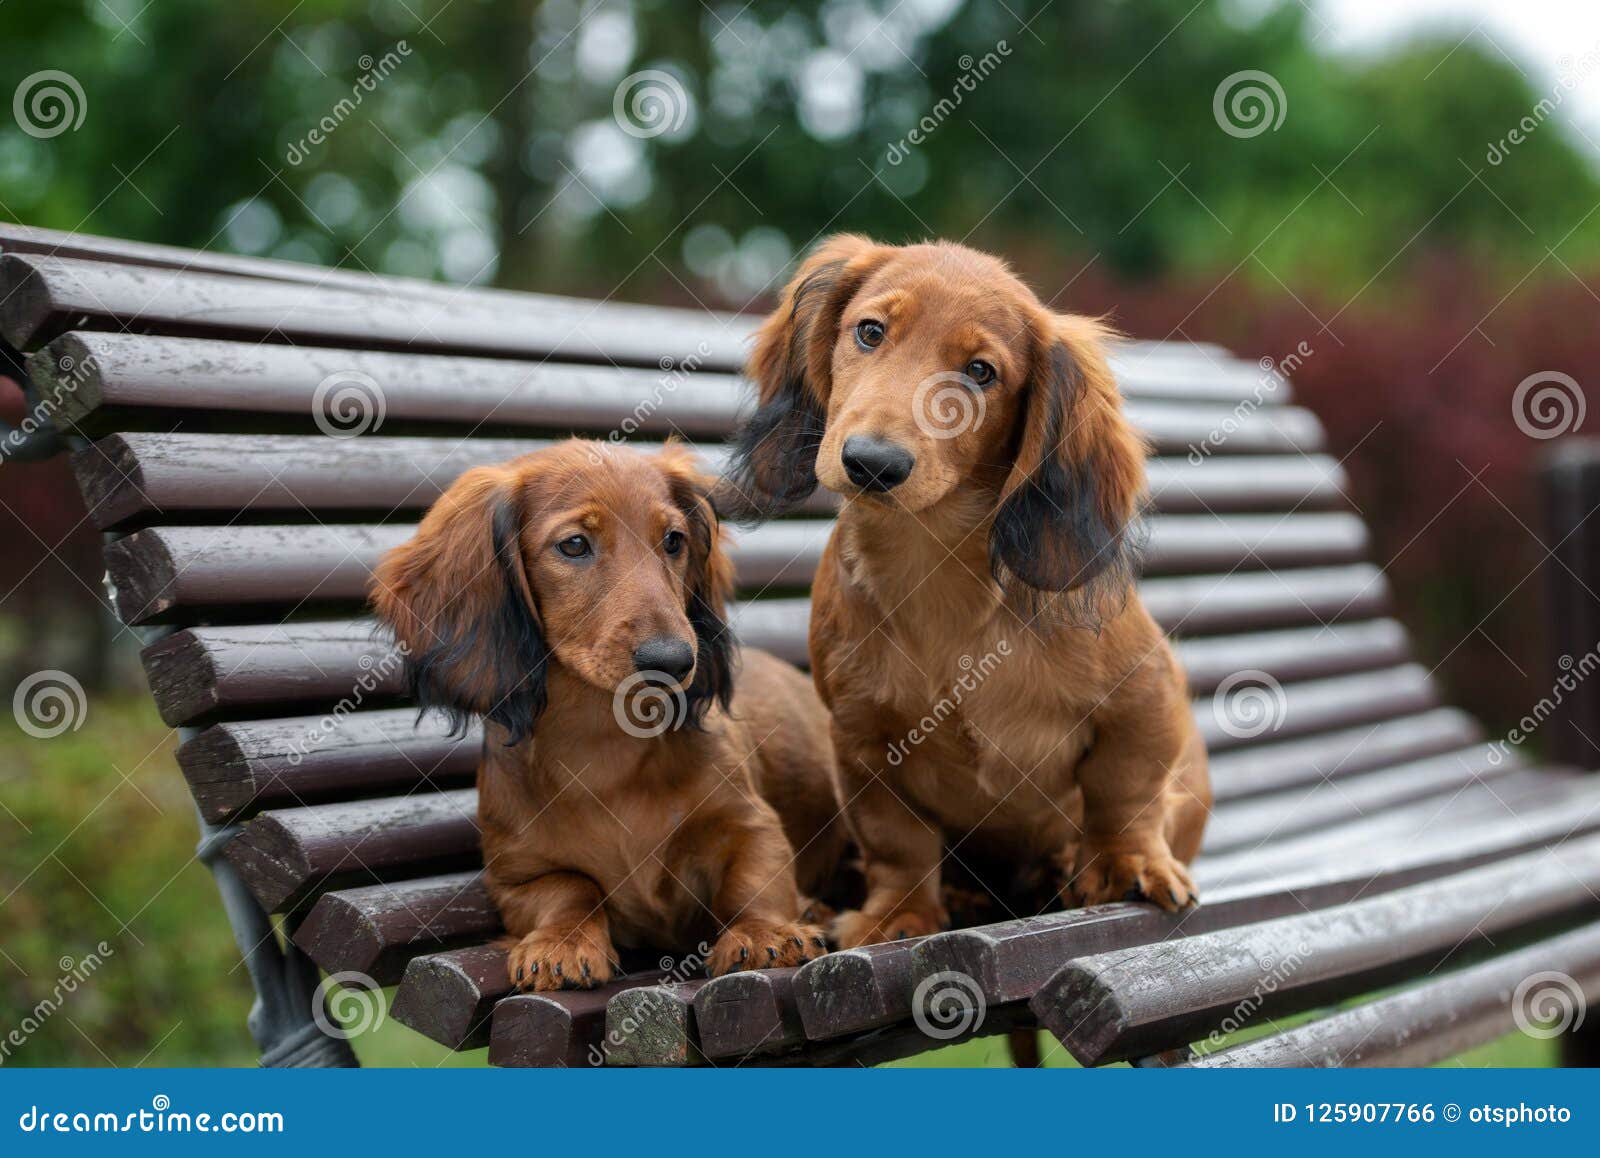 Long Haired Dachshund Puppies Posing Outdoors Stock Photo